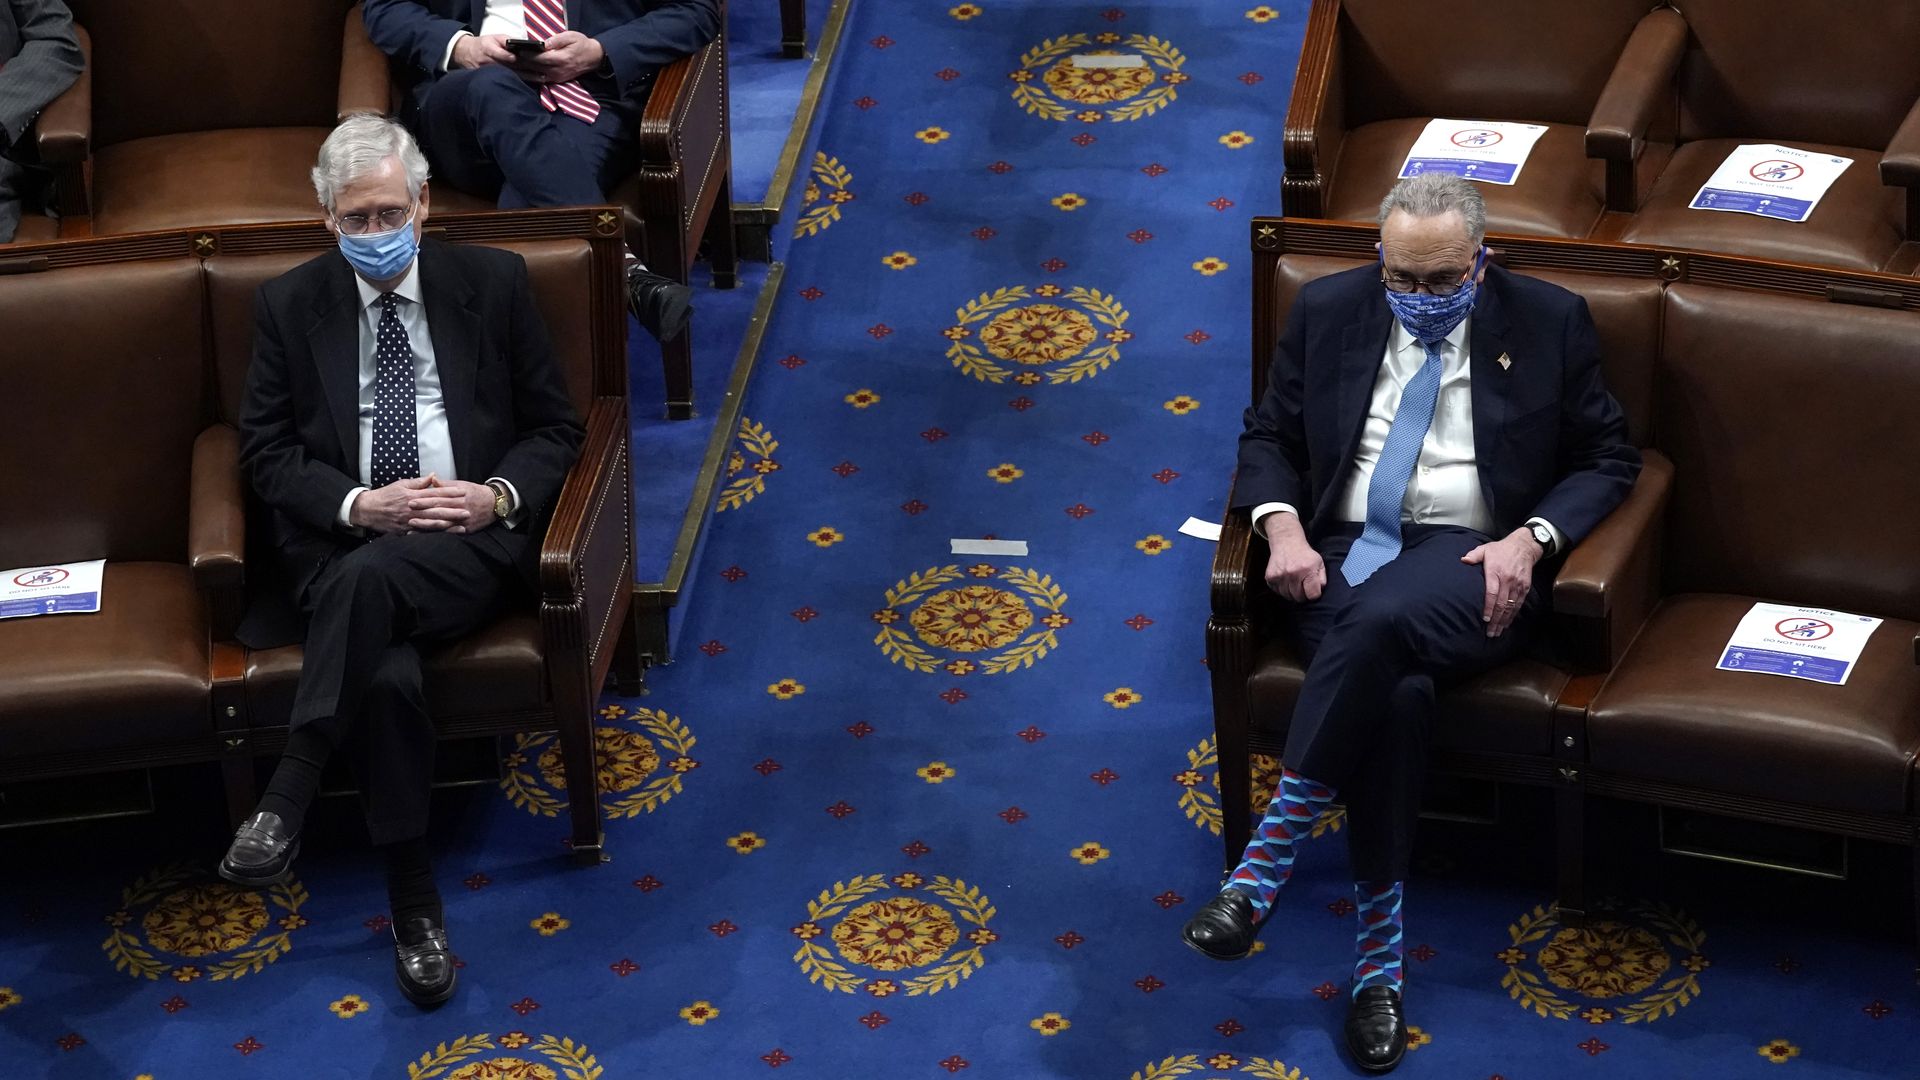 Mitch McConnell and Chuck Schumer are seen sitting across from one another as the Senate resumed work after the Capitol siege.